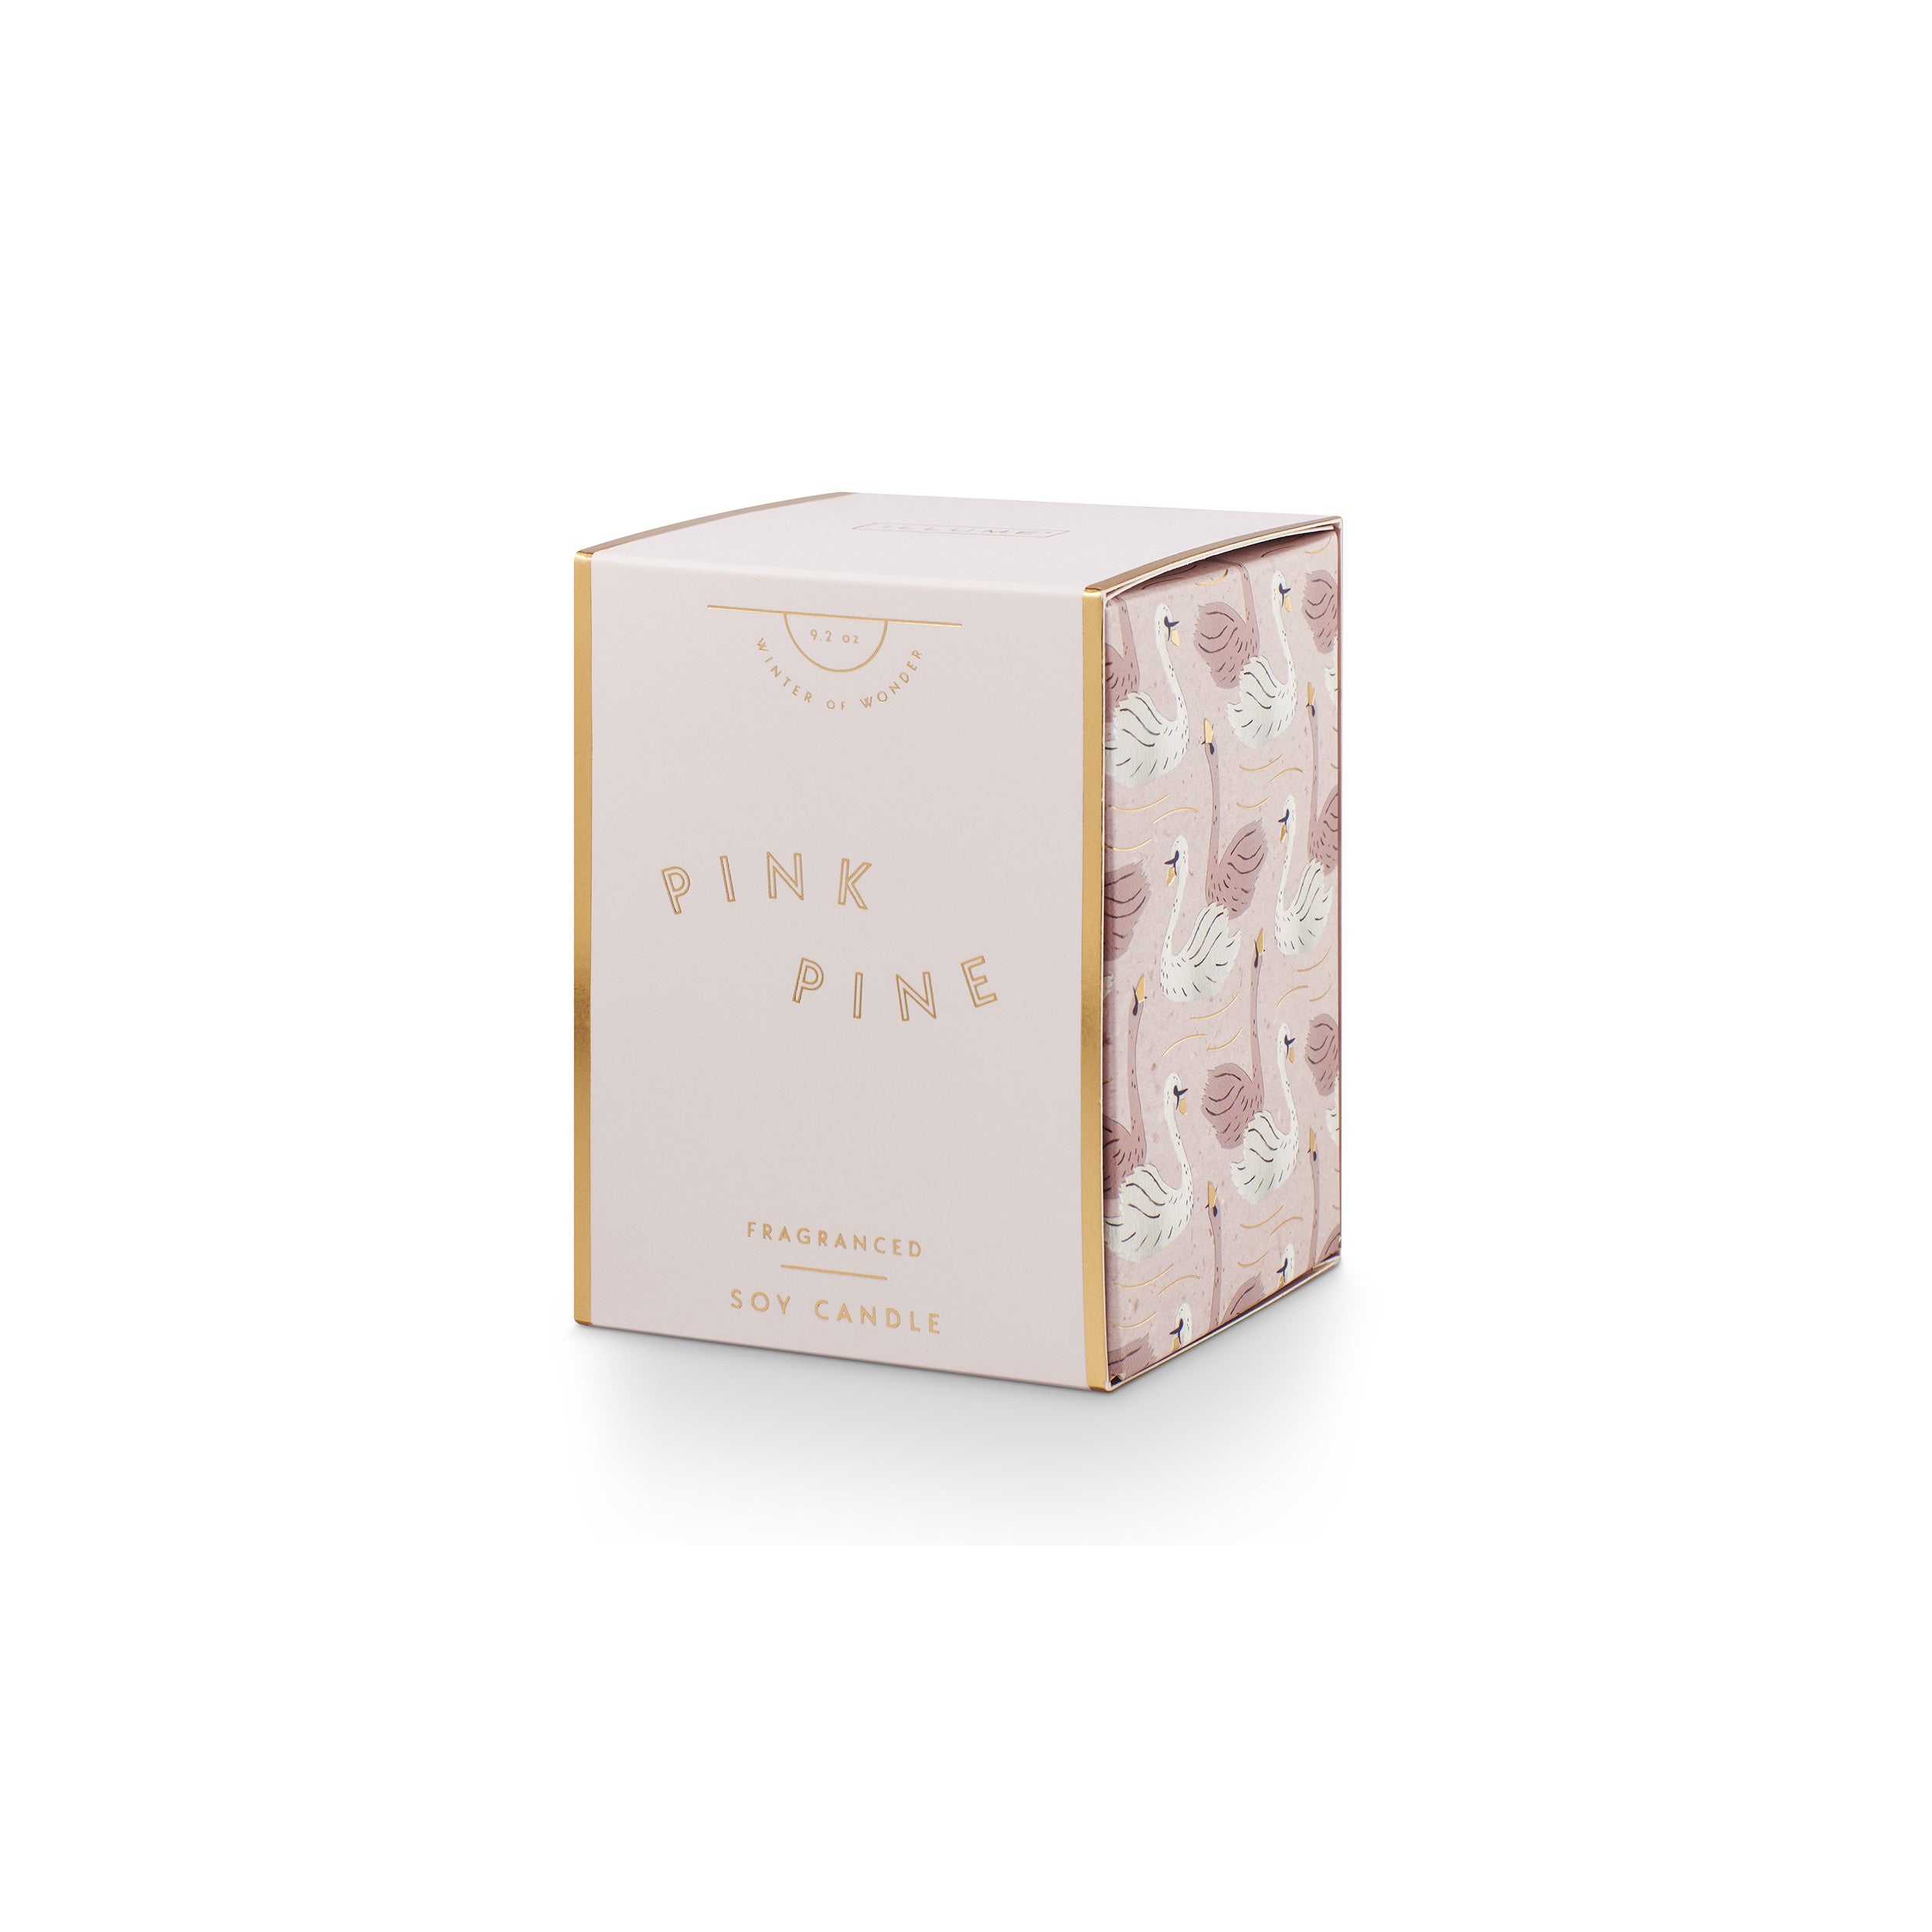 The Pink Pine Gifted Glass Candle